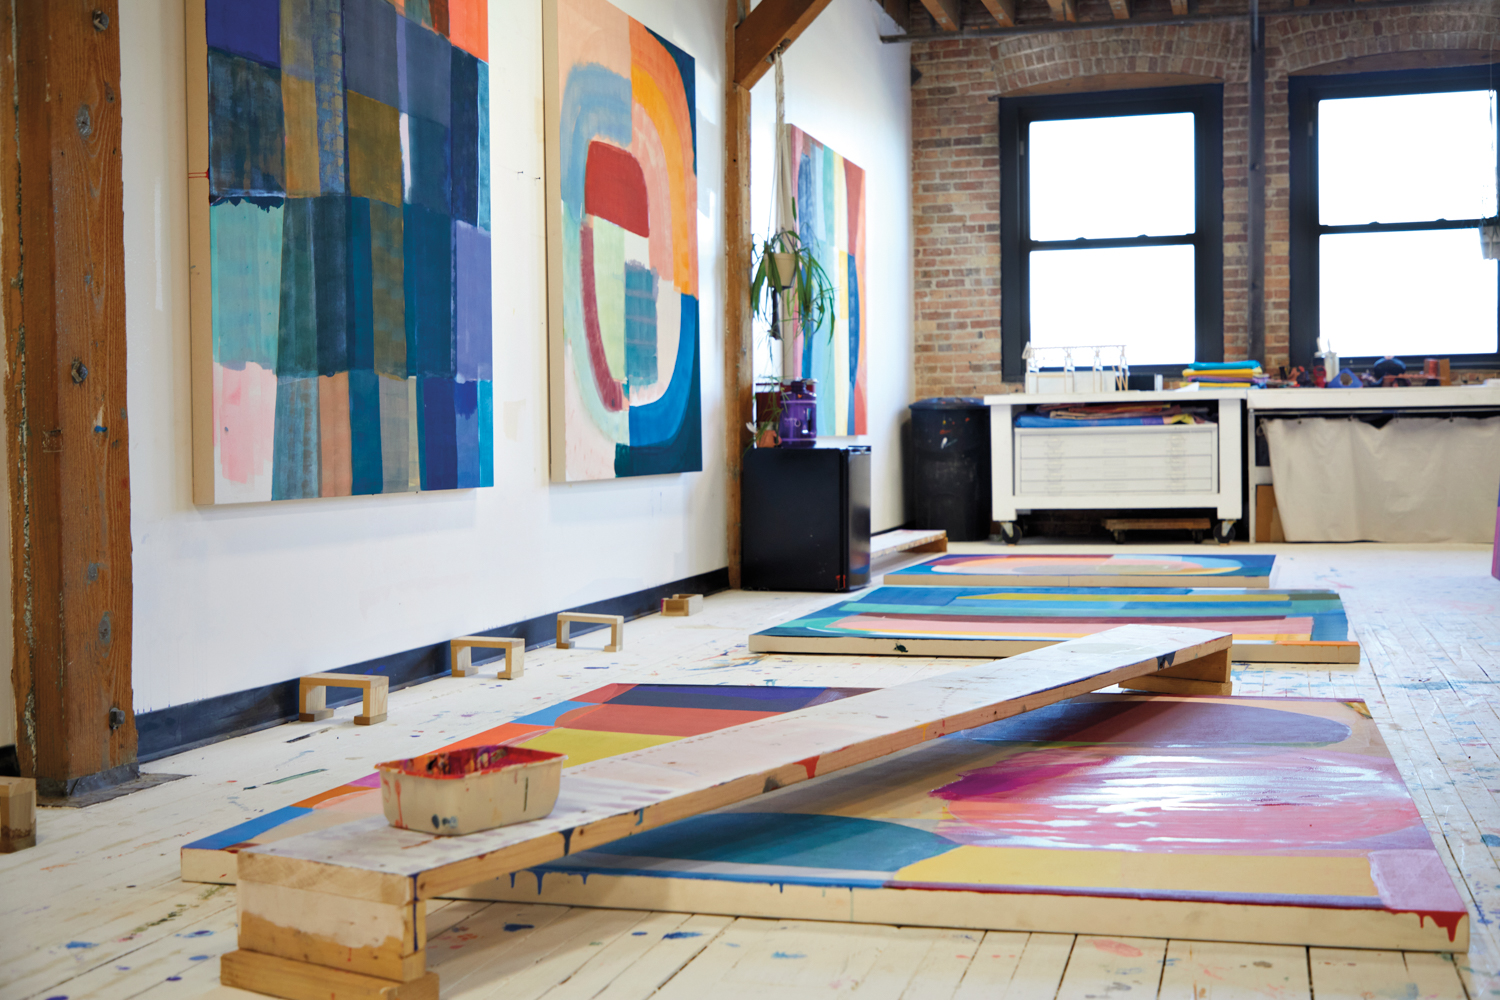 inside artist Anna Kunz's studio with abstract, colorful paintings on the floor and wall